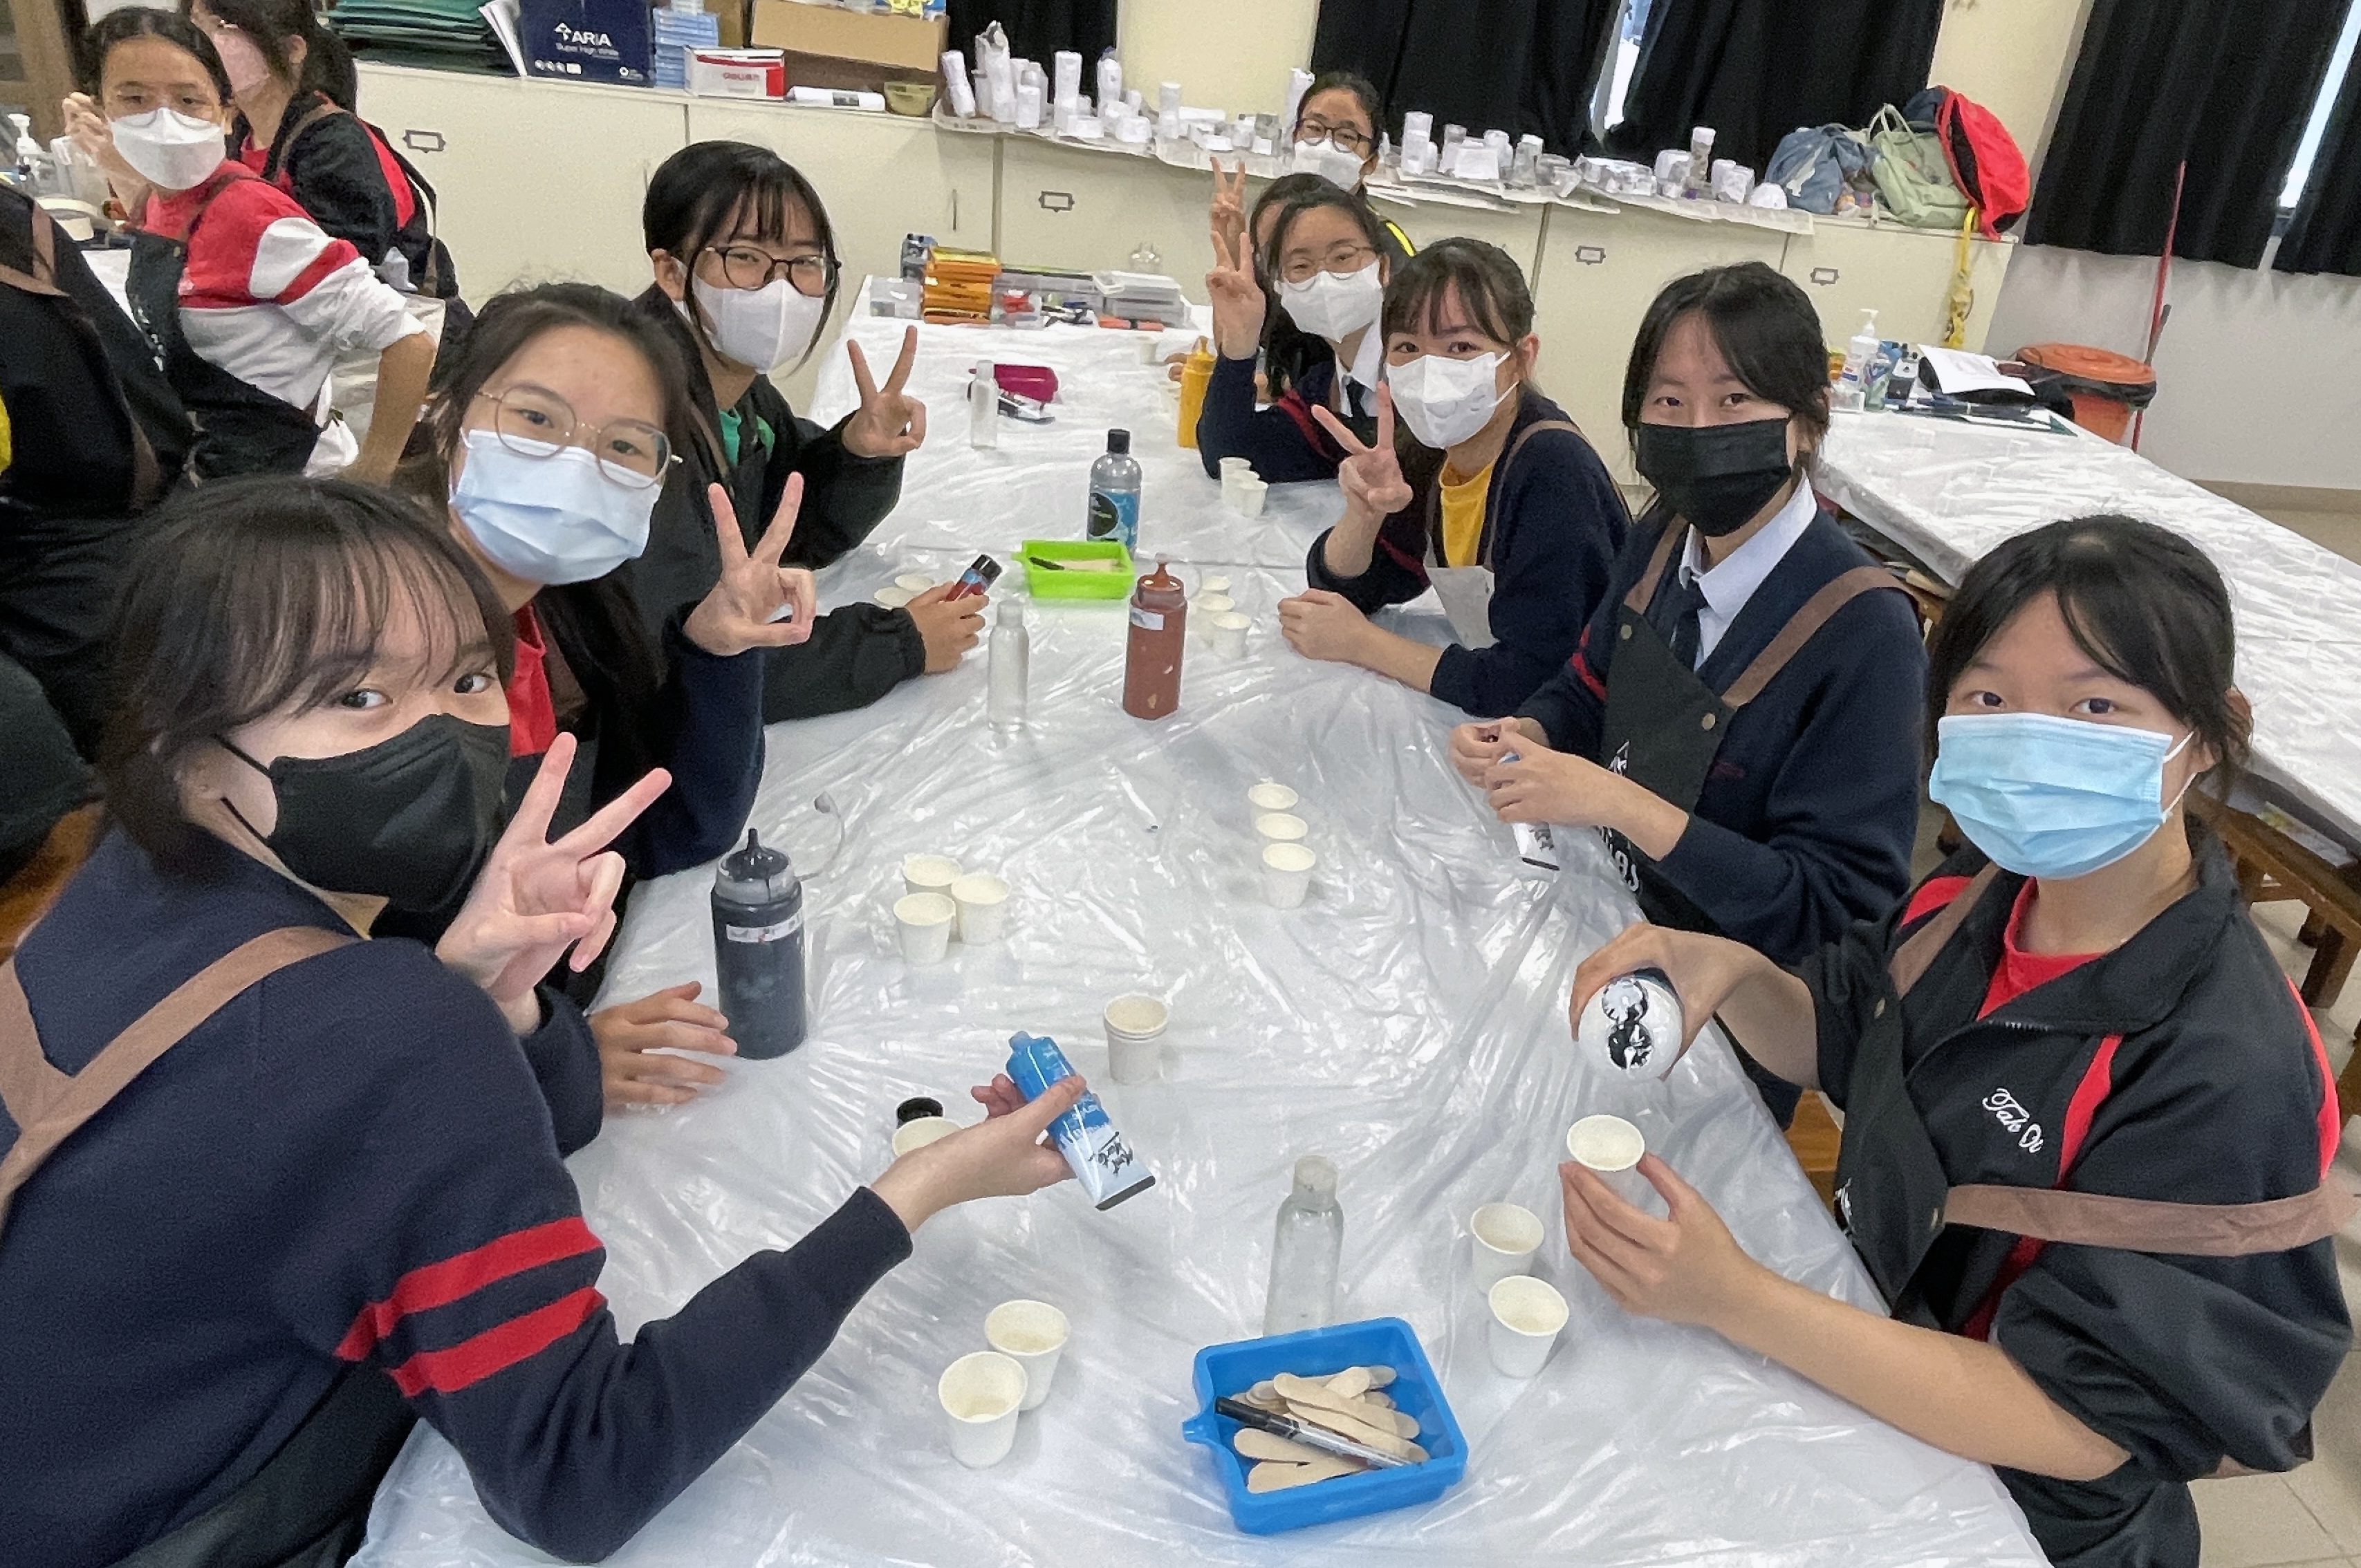 A group of people wearing face masks sitting at a tableDescription automatically generated